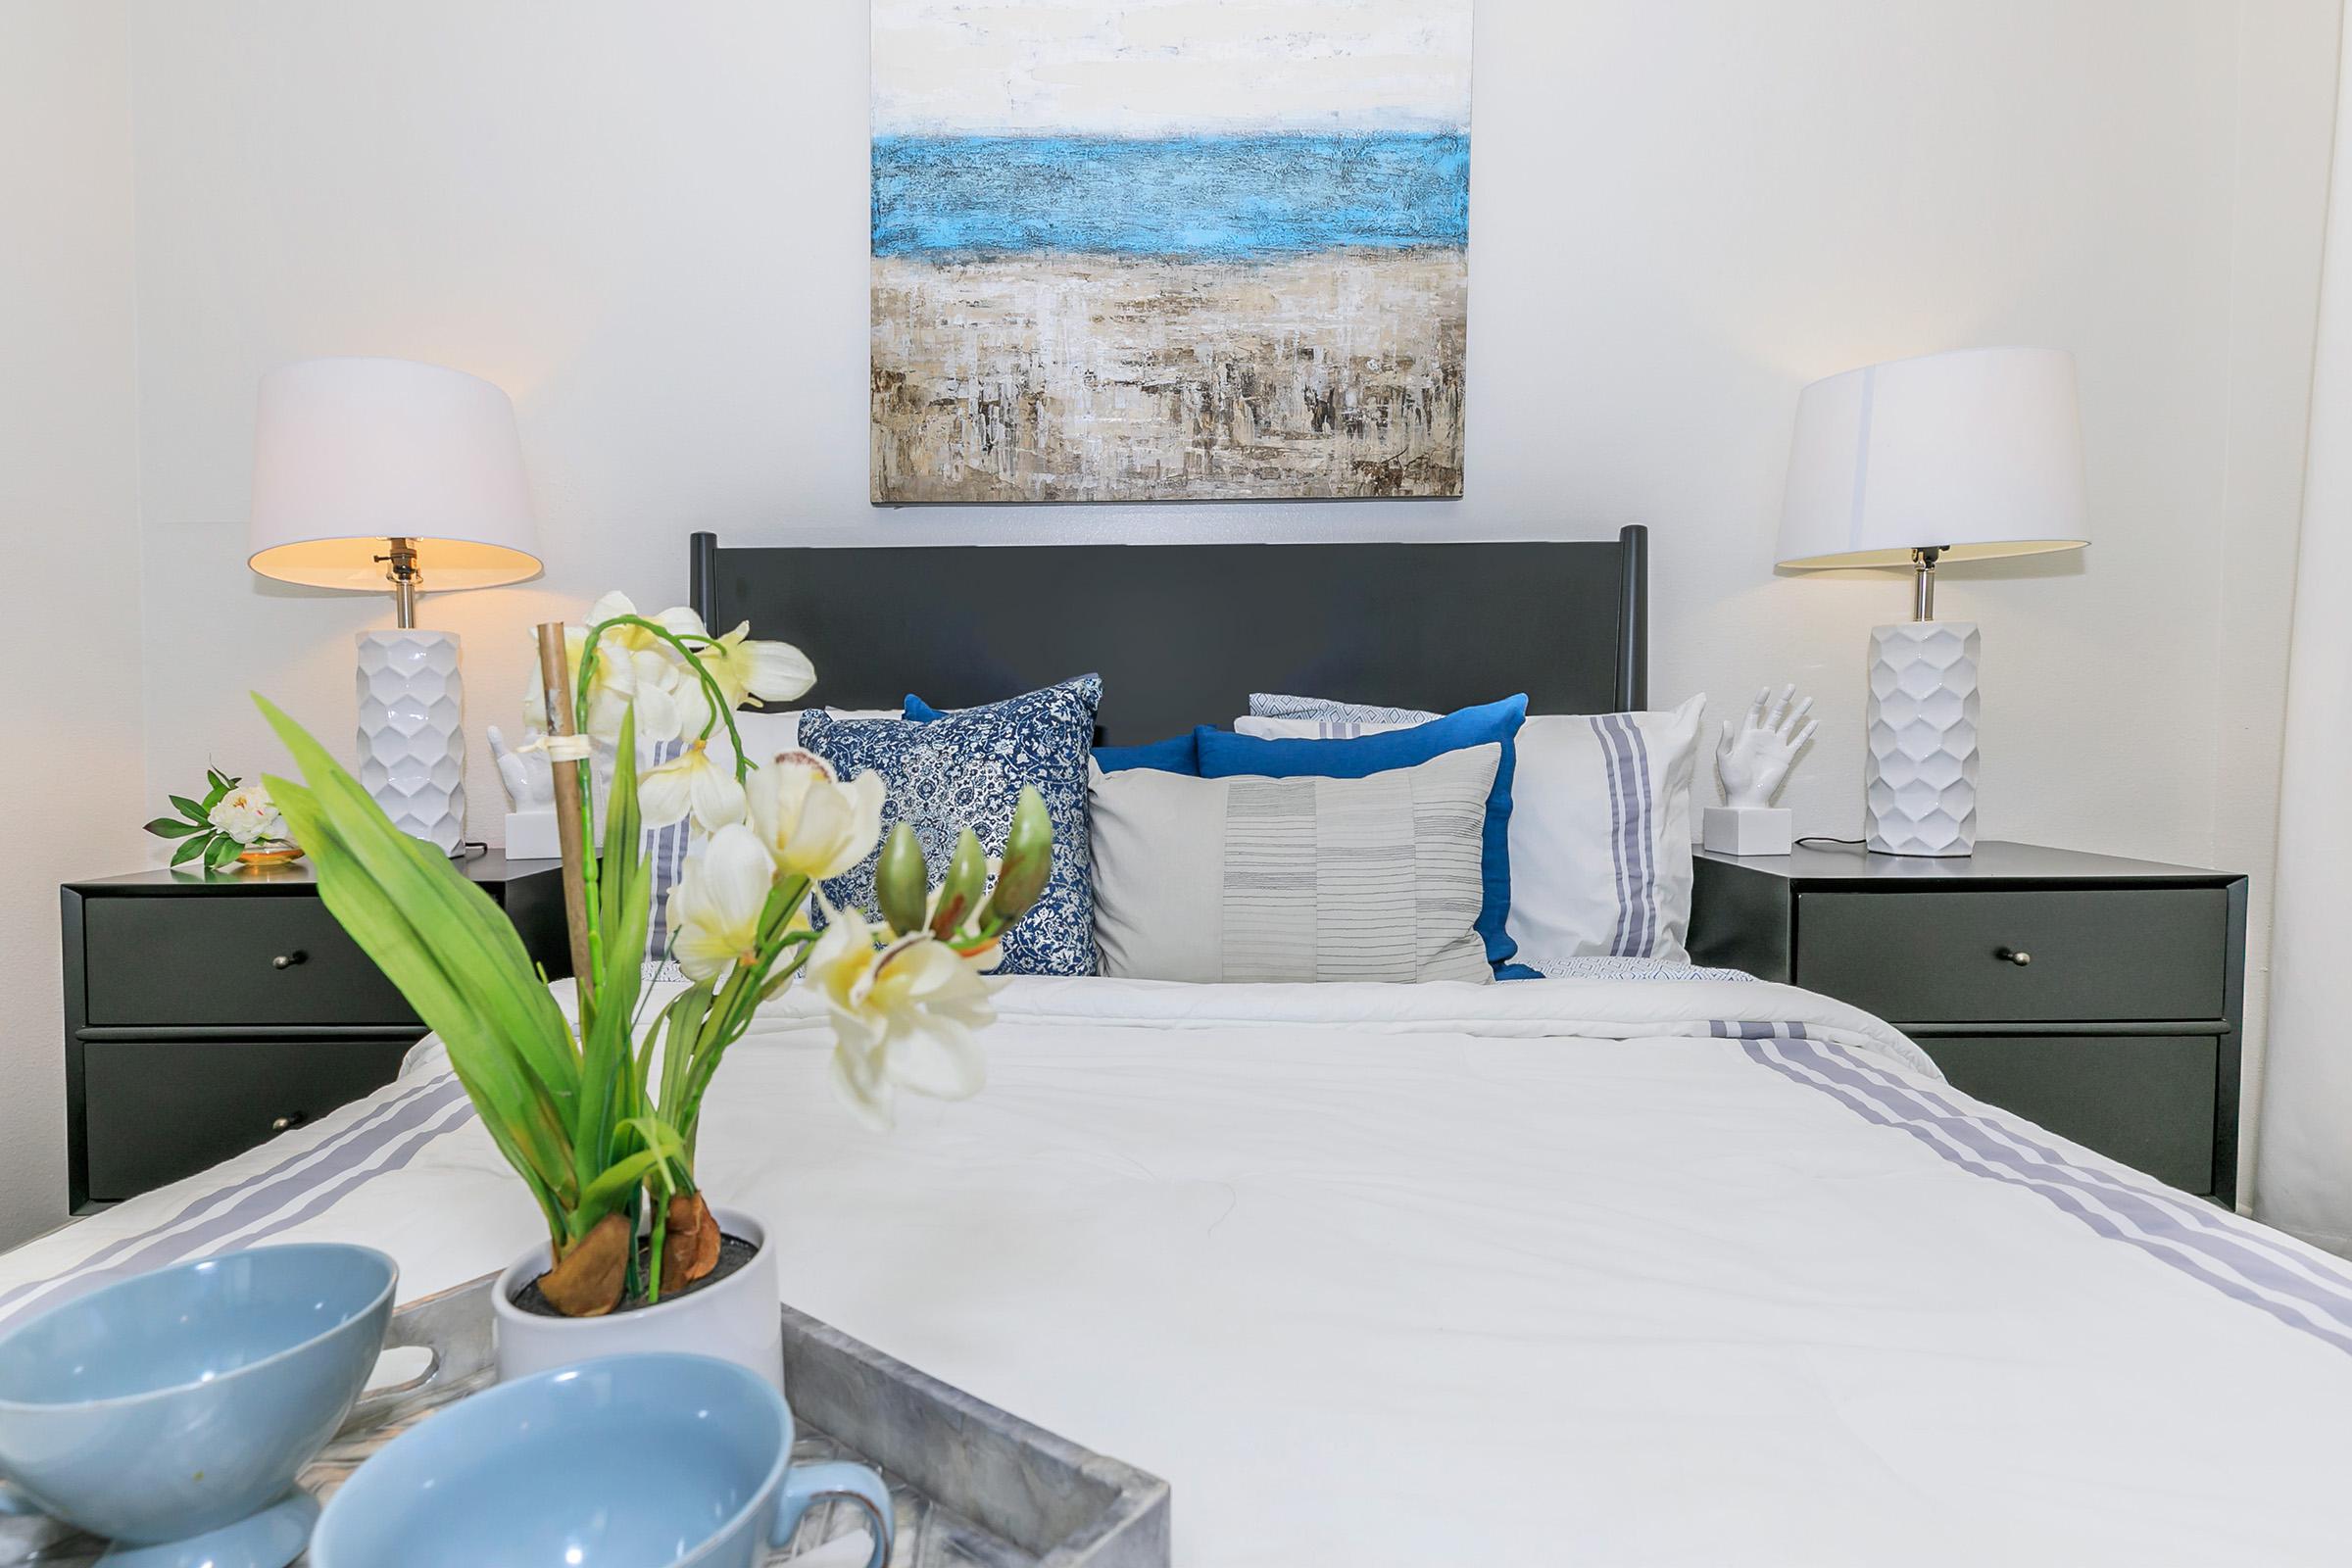 Close up view of a large bed, 2 night stands, wall art, and a breakfast tray in a bedroom at Rise North Ridge.